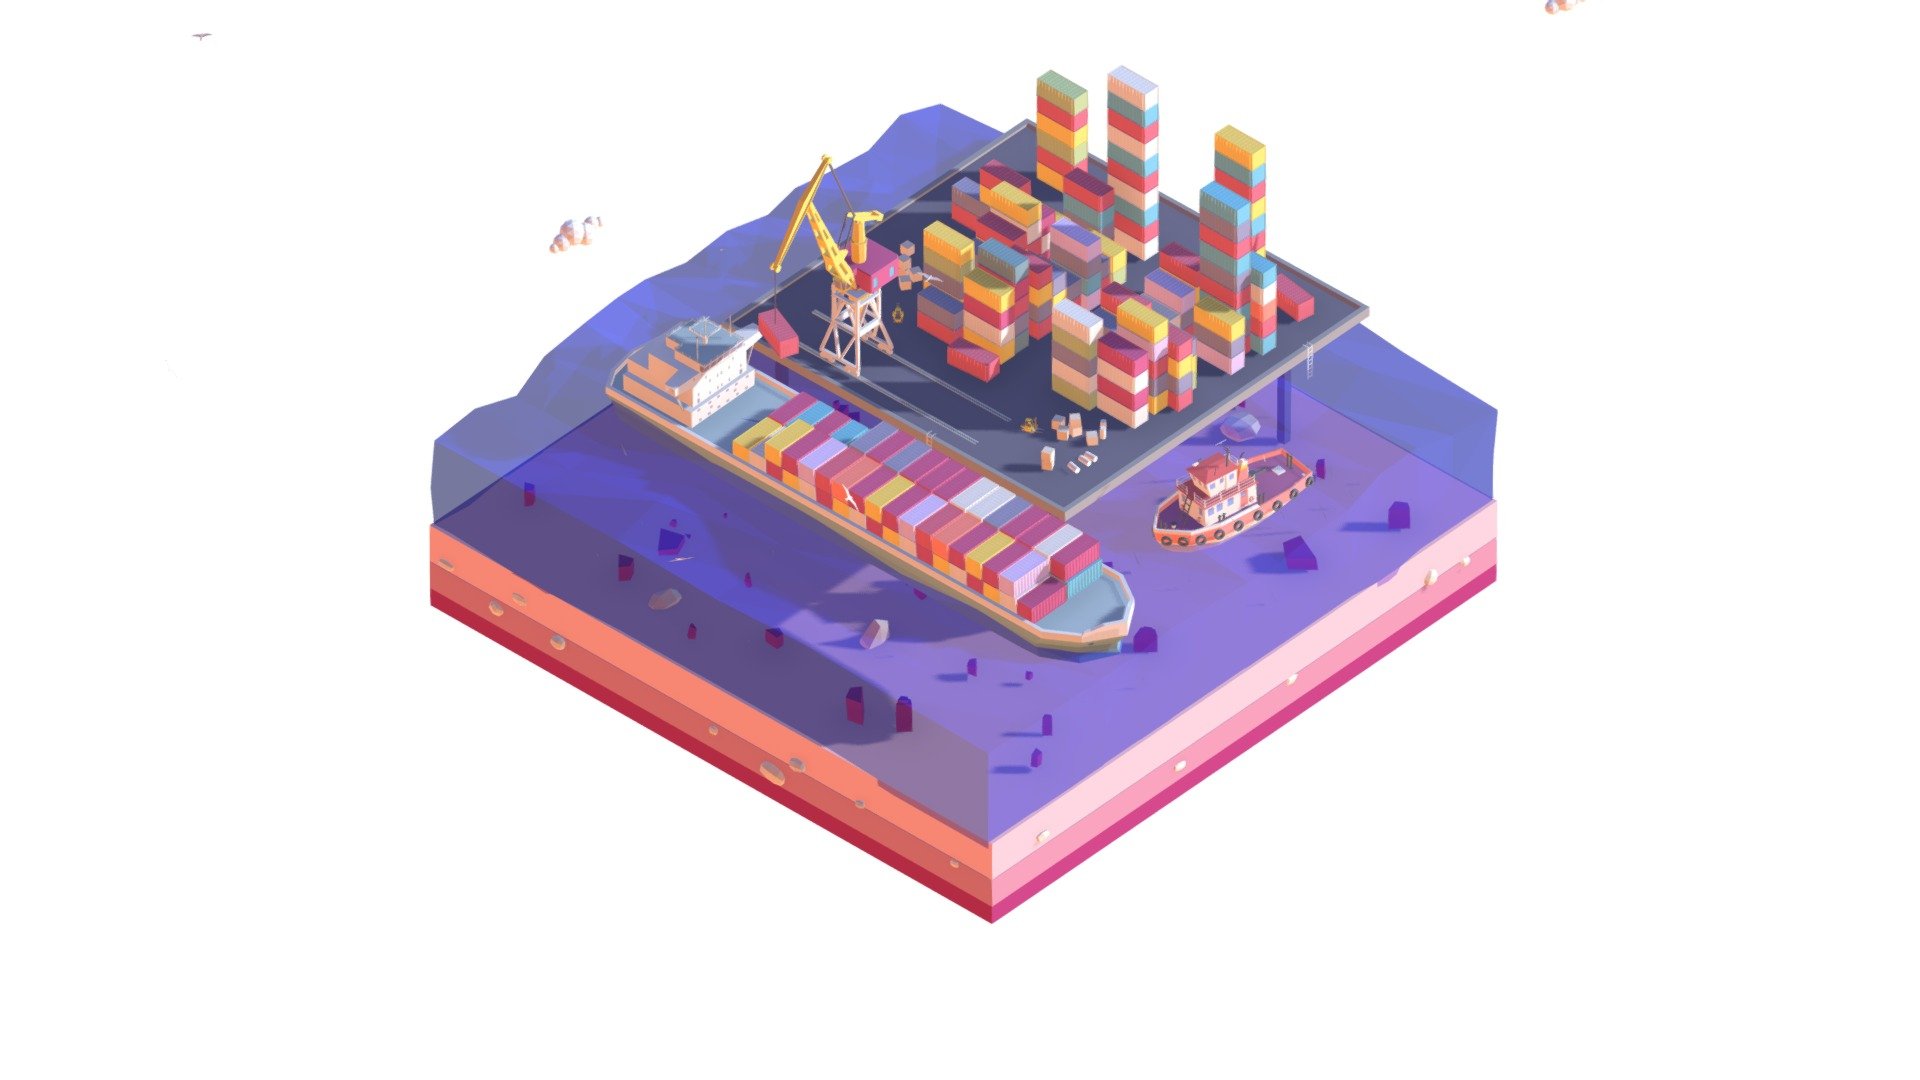 Cartoon Lowpoly Port Illustration Scene

Created on Cinema 4d R17 (Render Ready on native file)

199 434 Polygons

Procedural textured

Game Ready

AR/VR Ready
 - Cartoon Low Poly Lowpoly Seaport Illustration - Buy Royalty Free 3D model by antonmoek 3d model